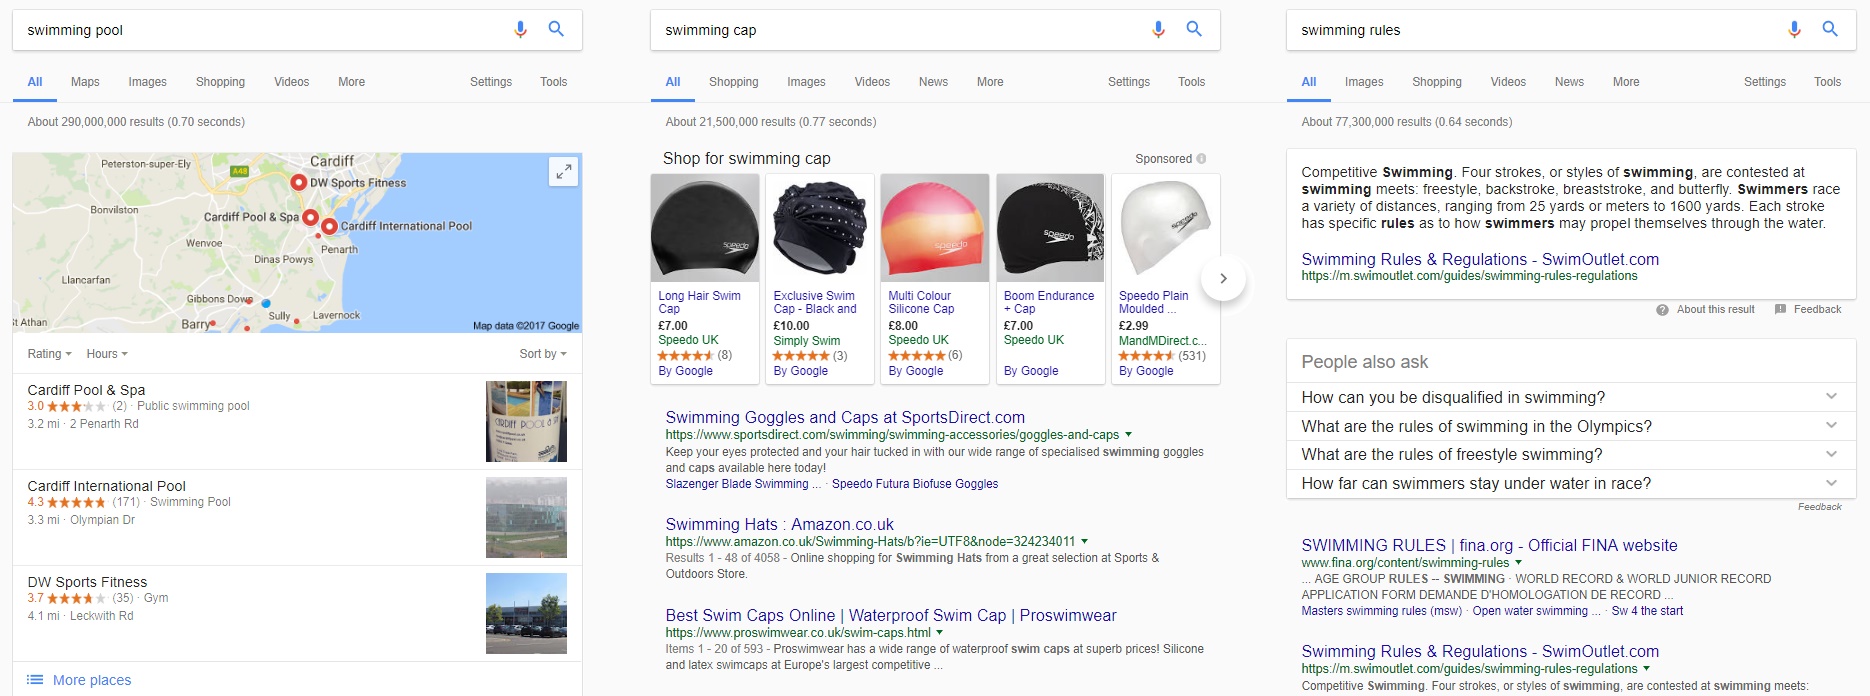 Swimming search results